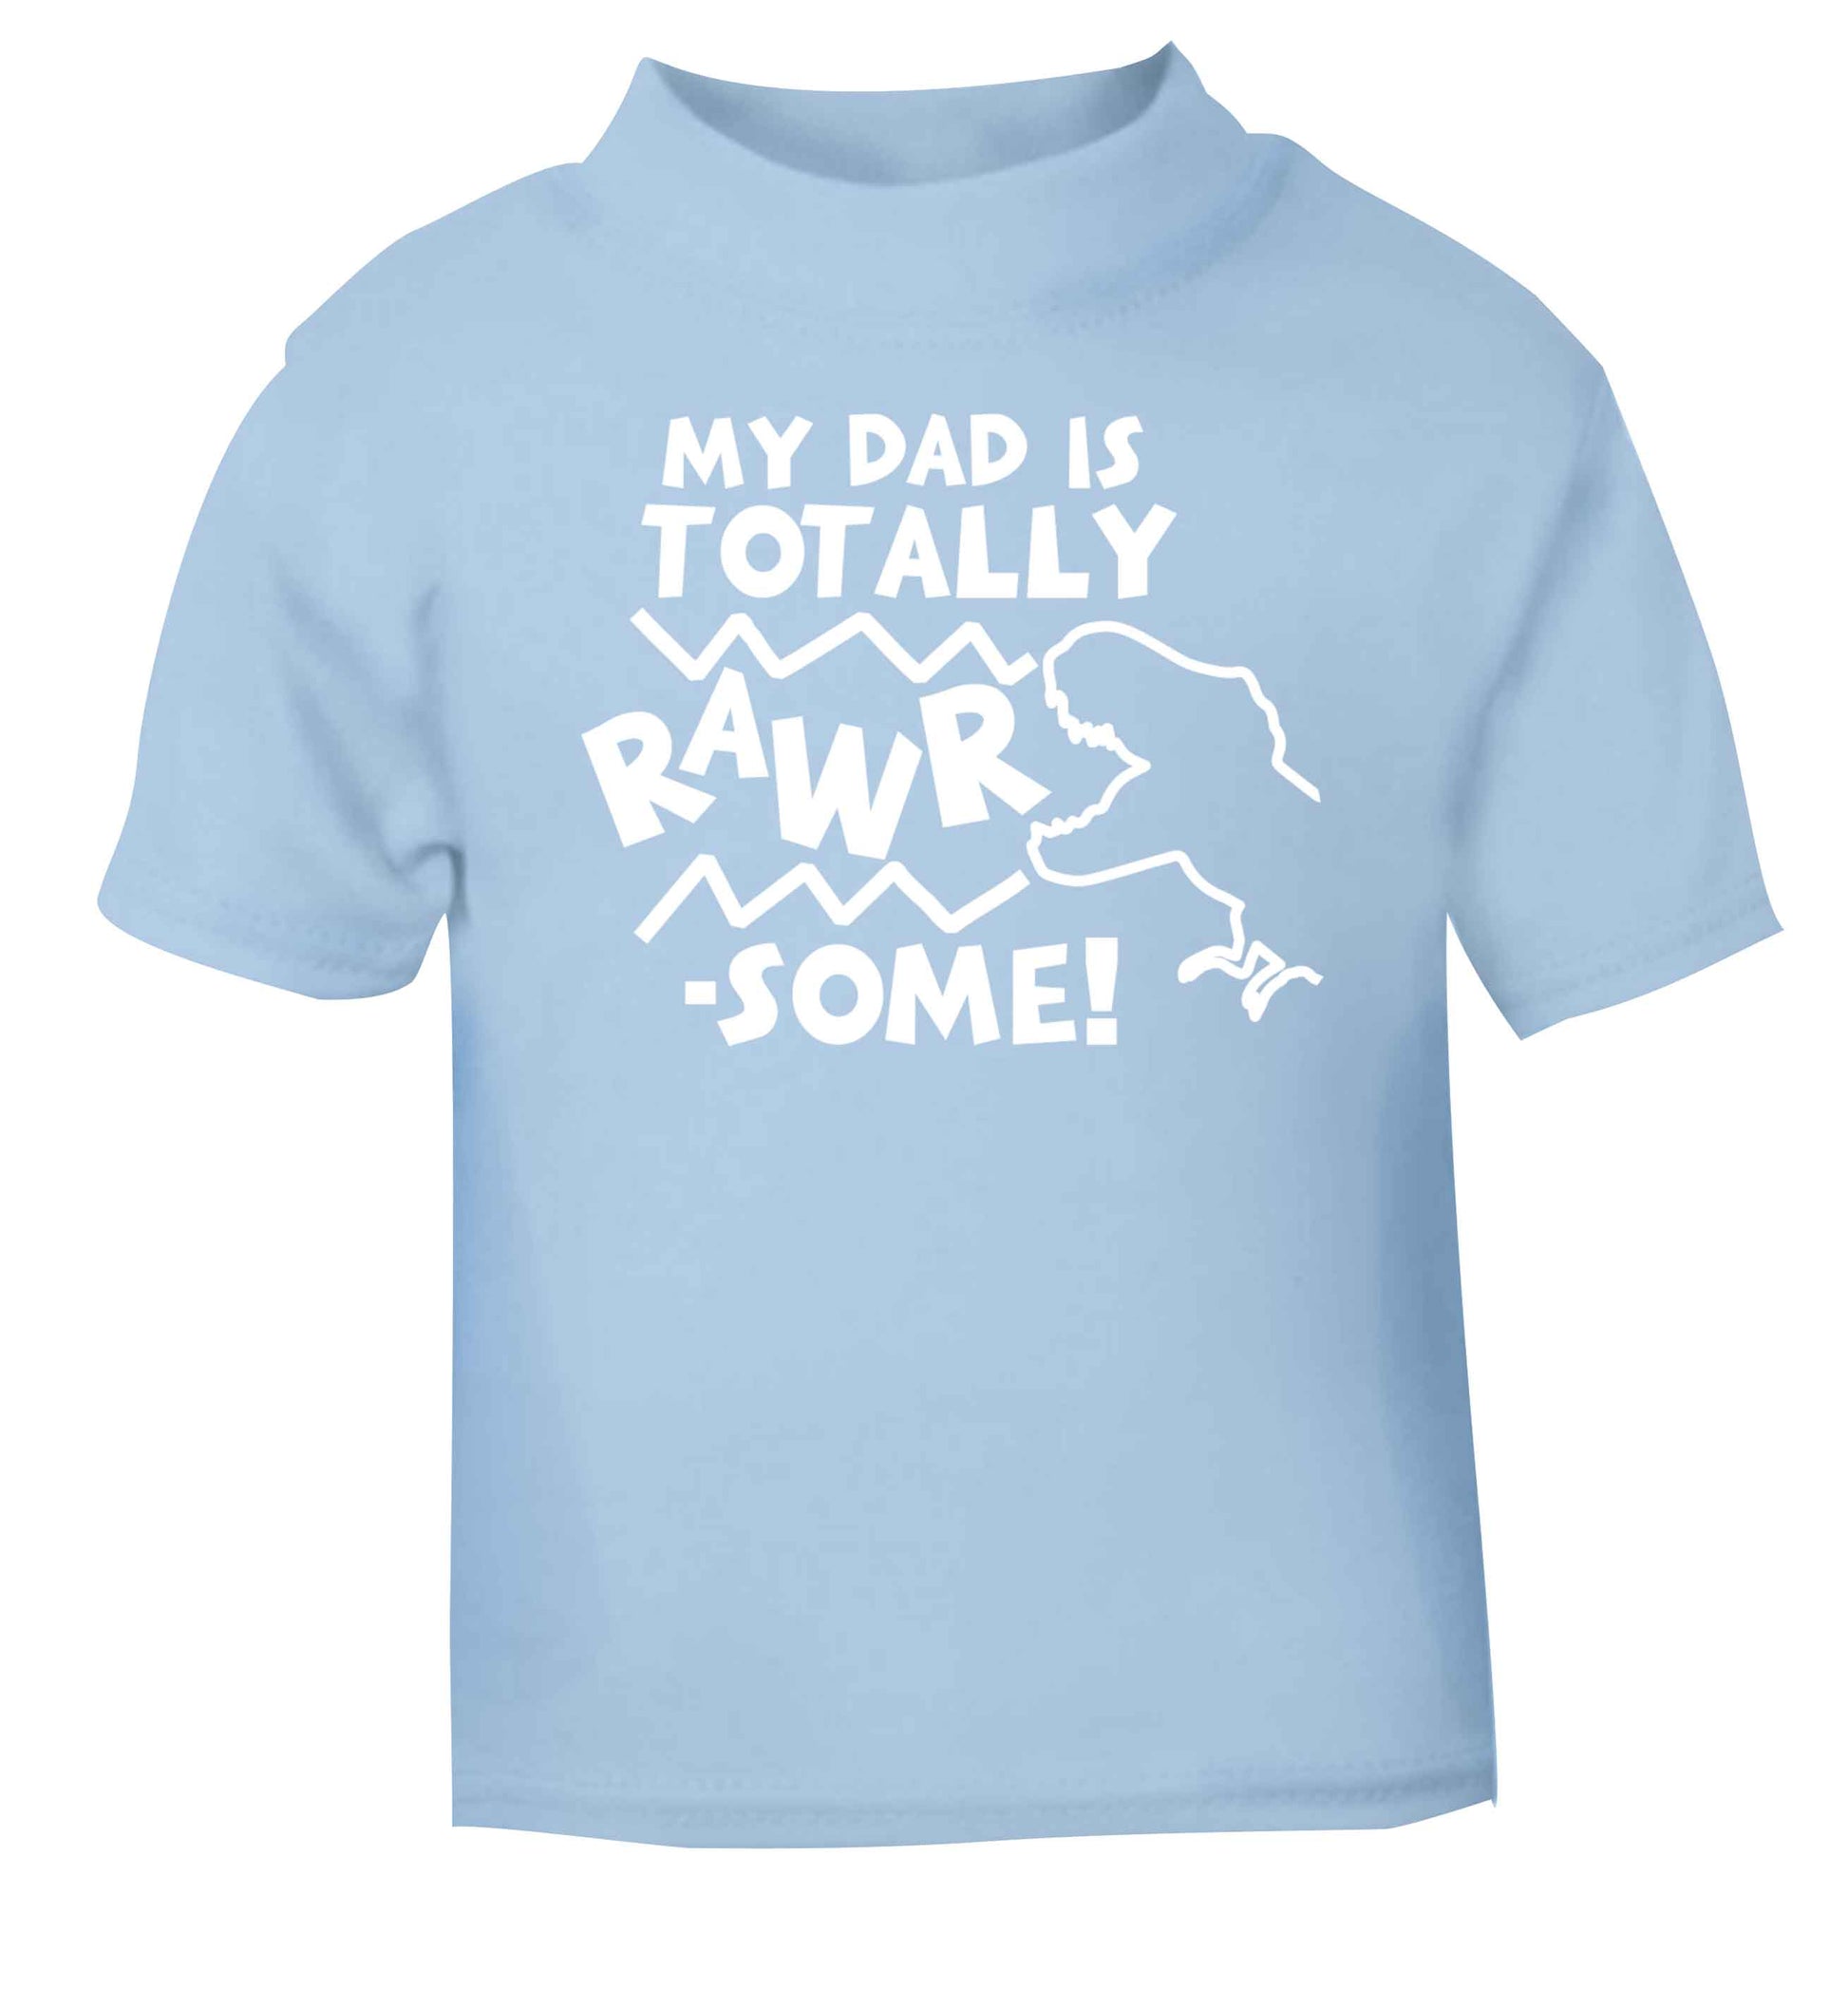 My dad is totally rawrsome light blue baby toddler Tshirt 2 Years